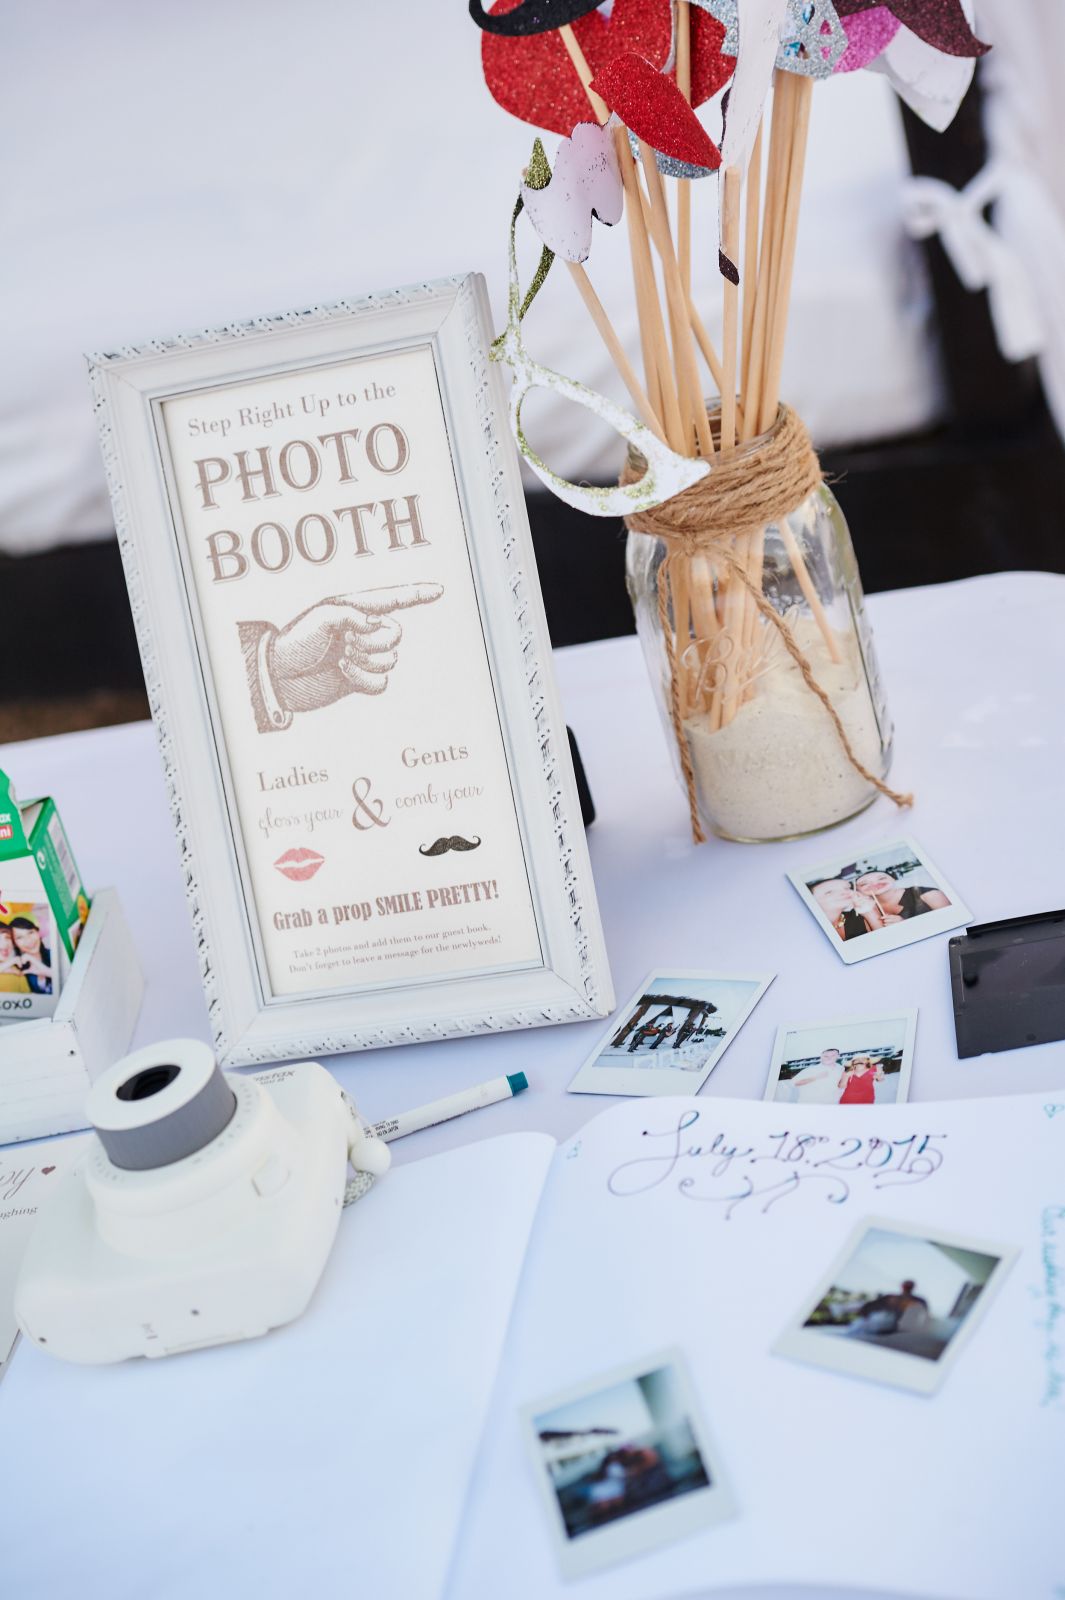 Photobooth/Guest Book